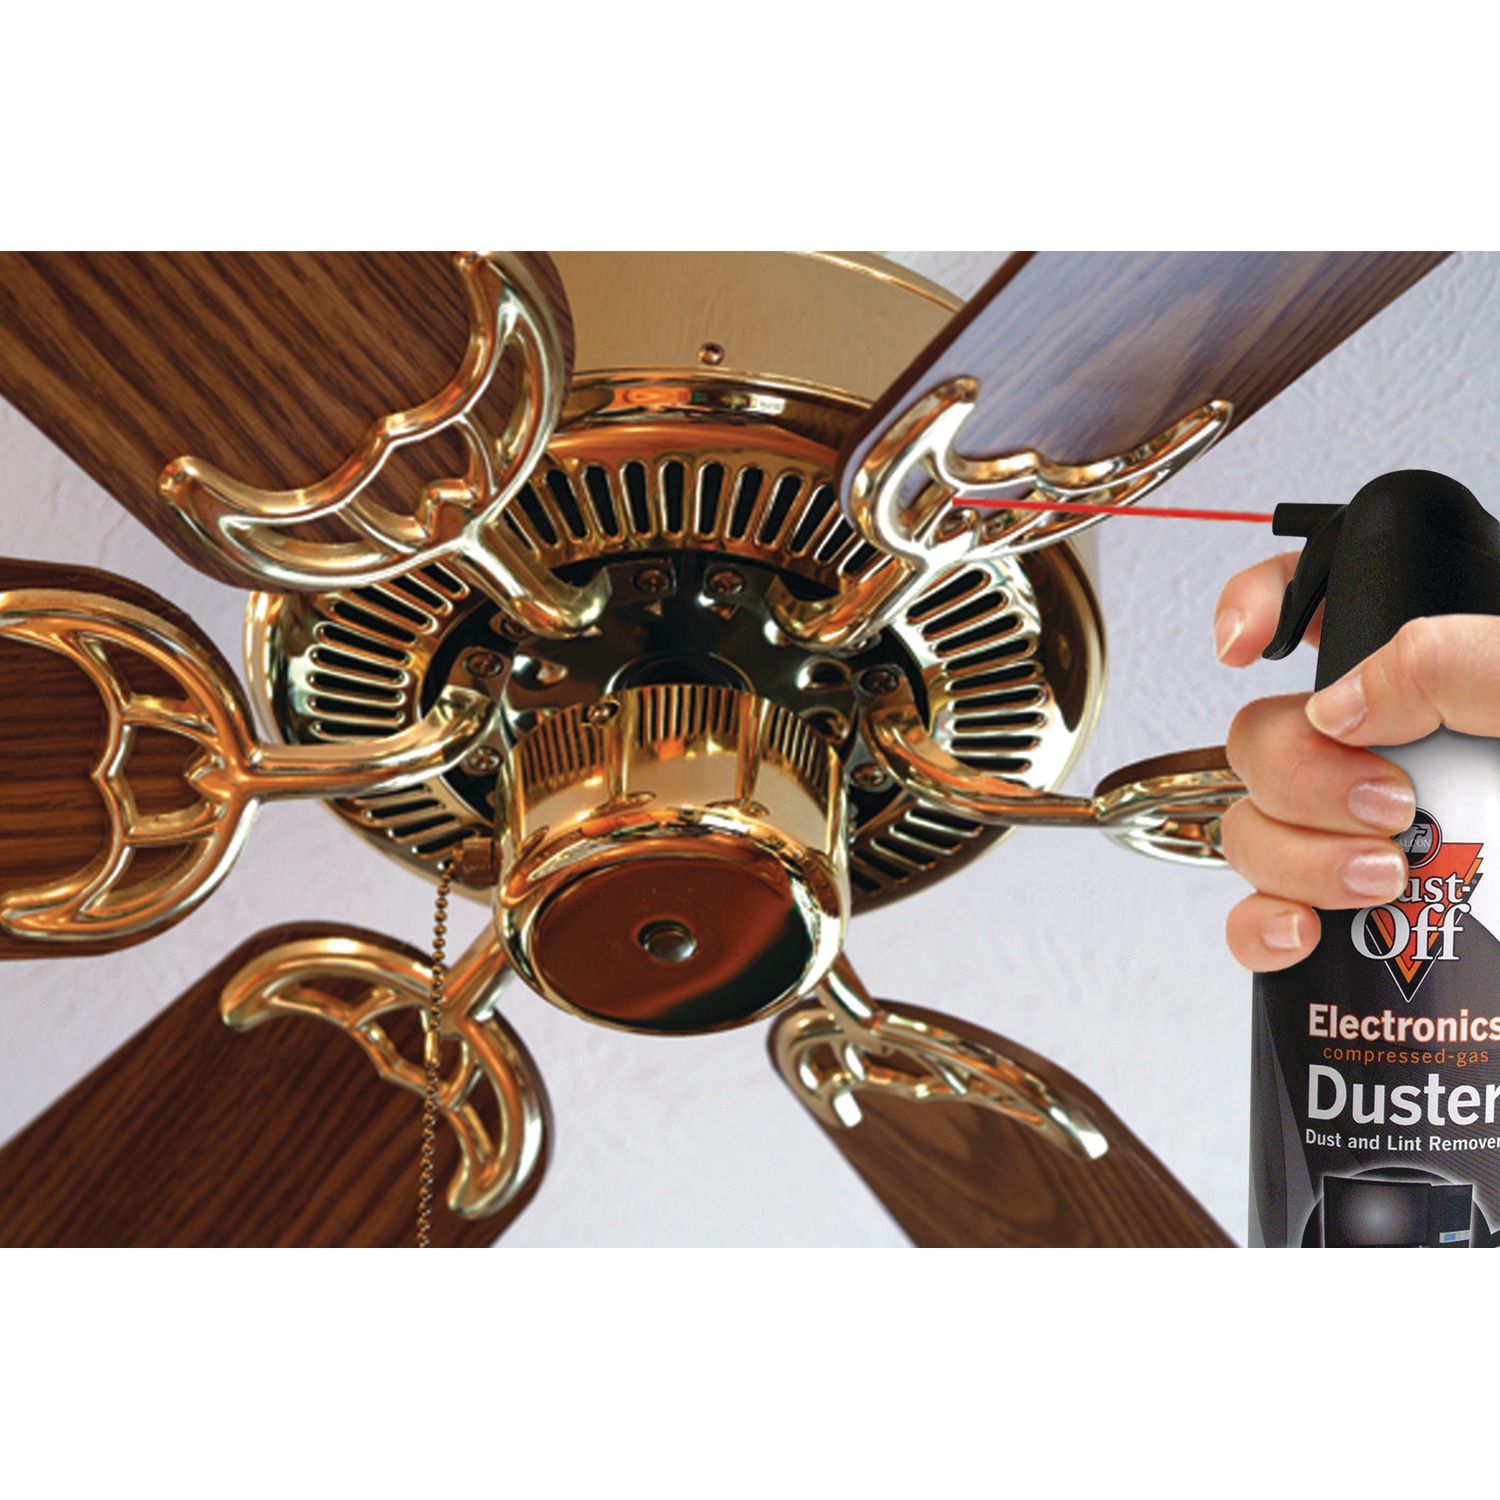 Dust-Off Disposable Compressed Gas Duster, 10 oz Can - image 4 of 8